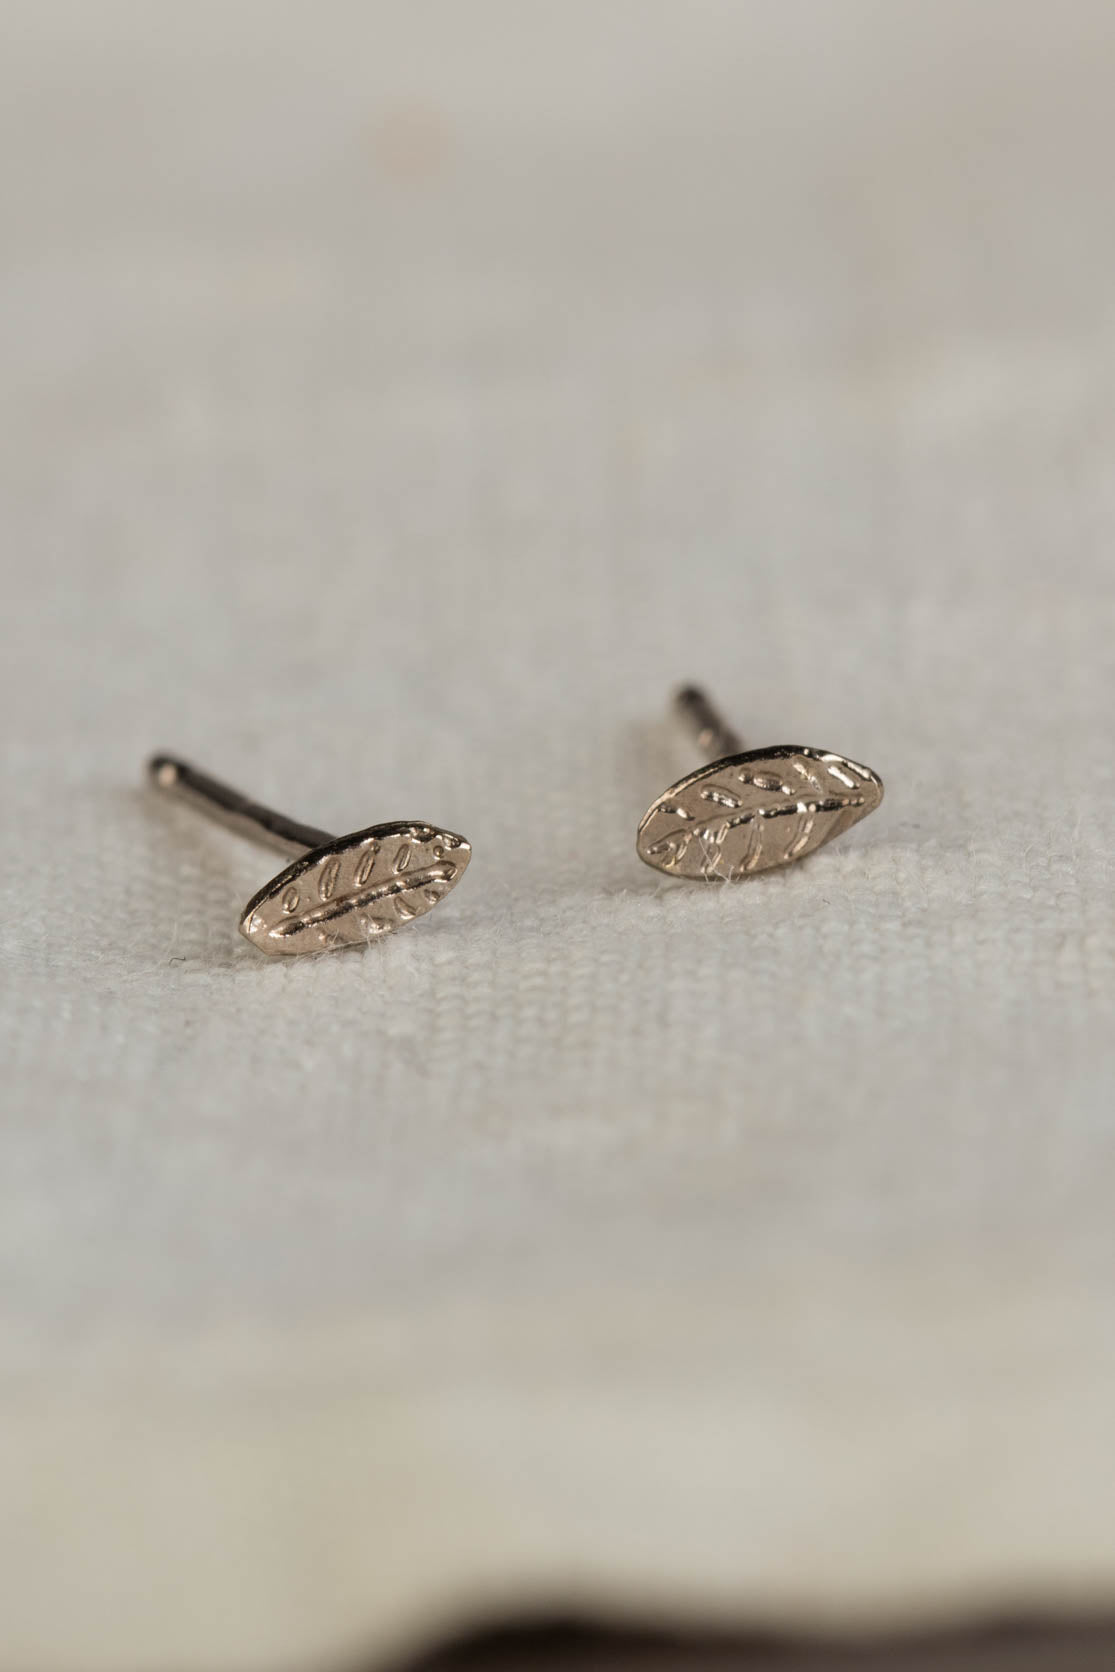 Earrings in yellow 14K gold - shiny bent branch with small leaves |  Jewellery Eshop UK